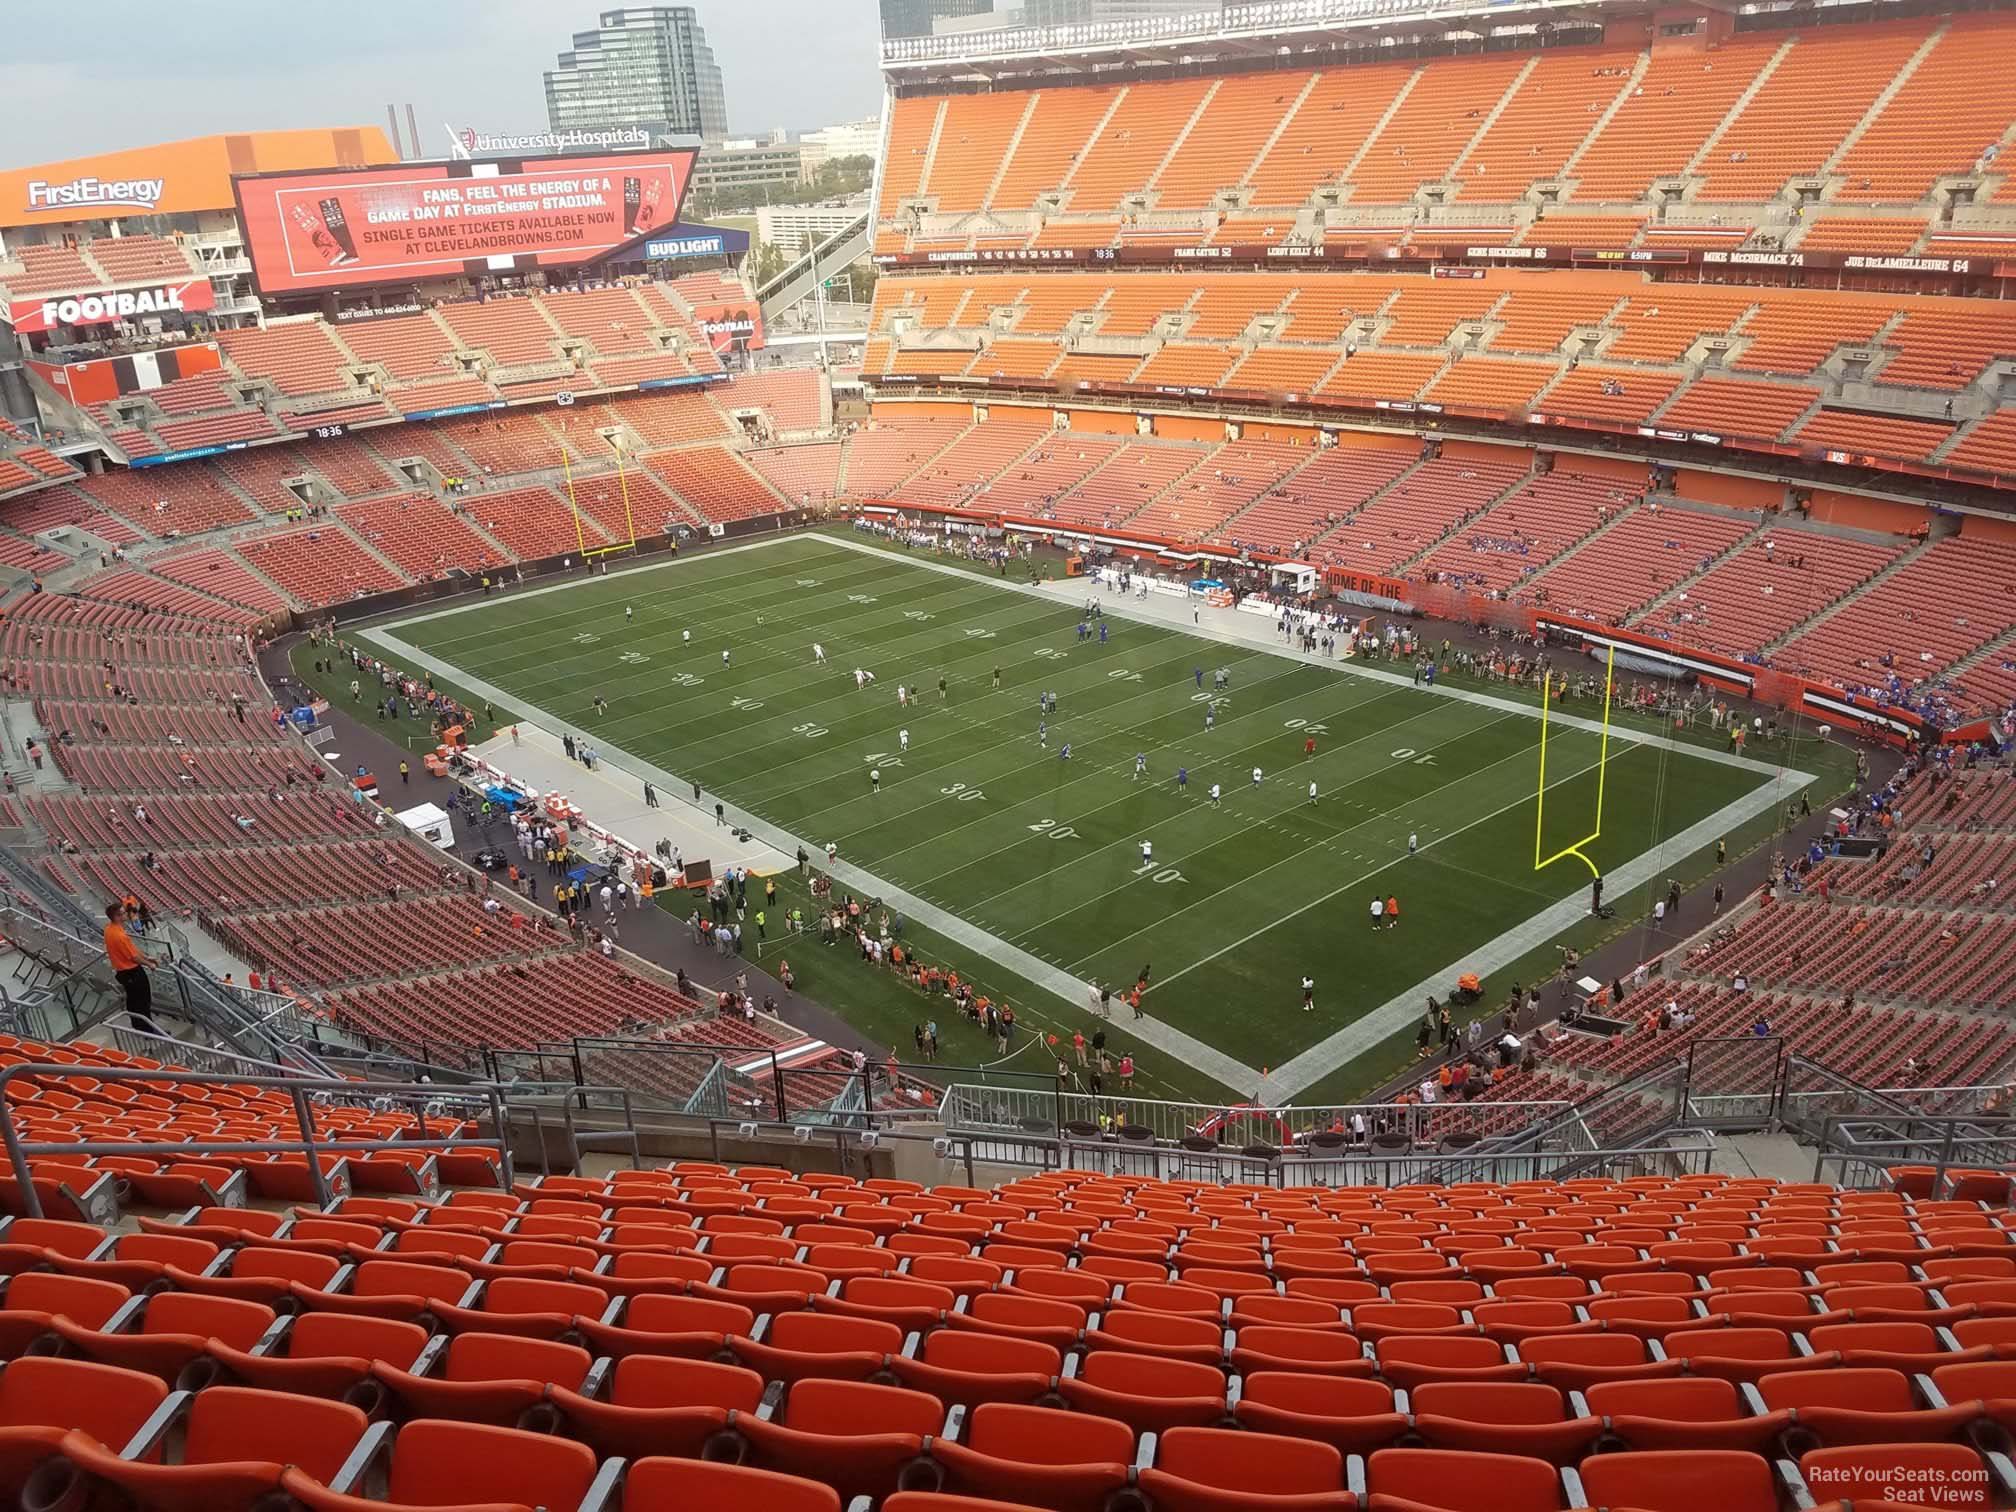 section-541-at-first-energy-stadium-rateyourseats